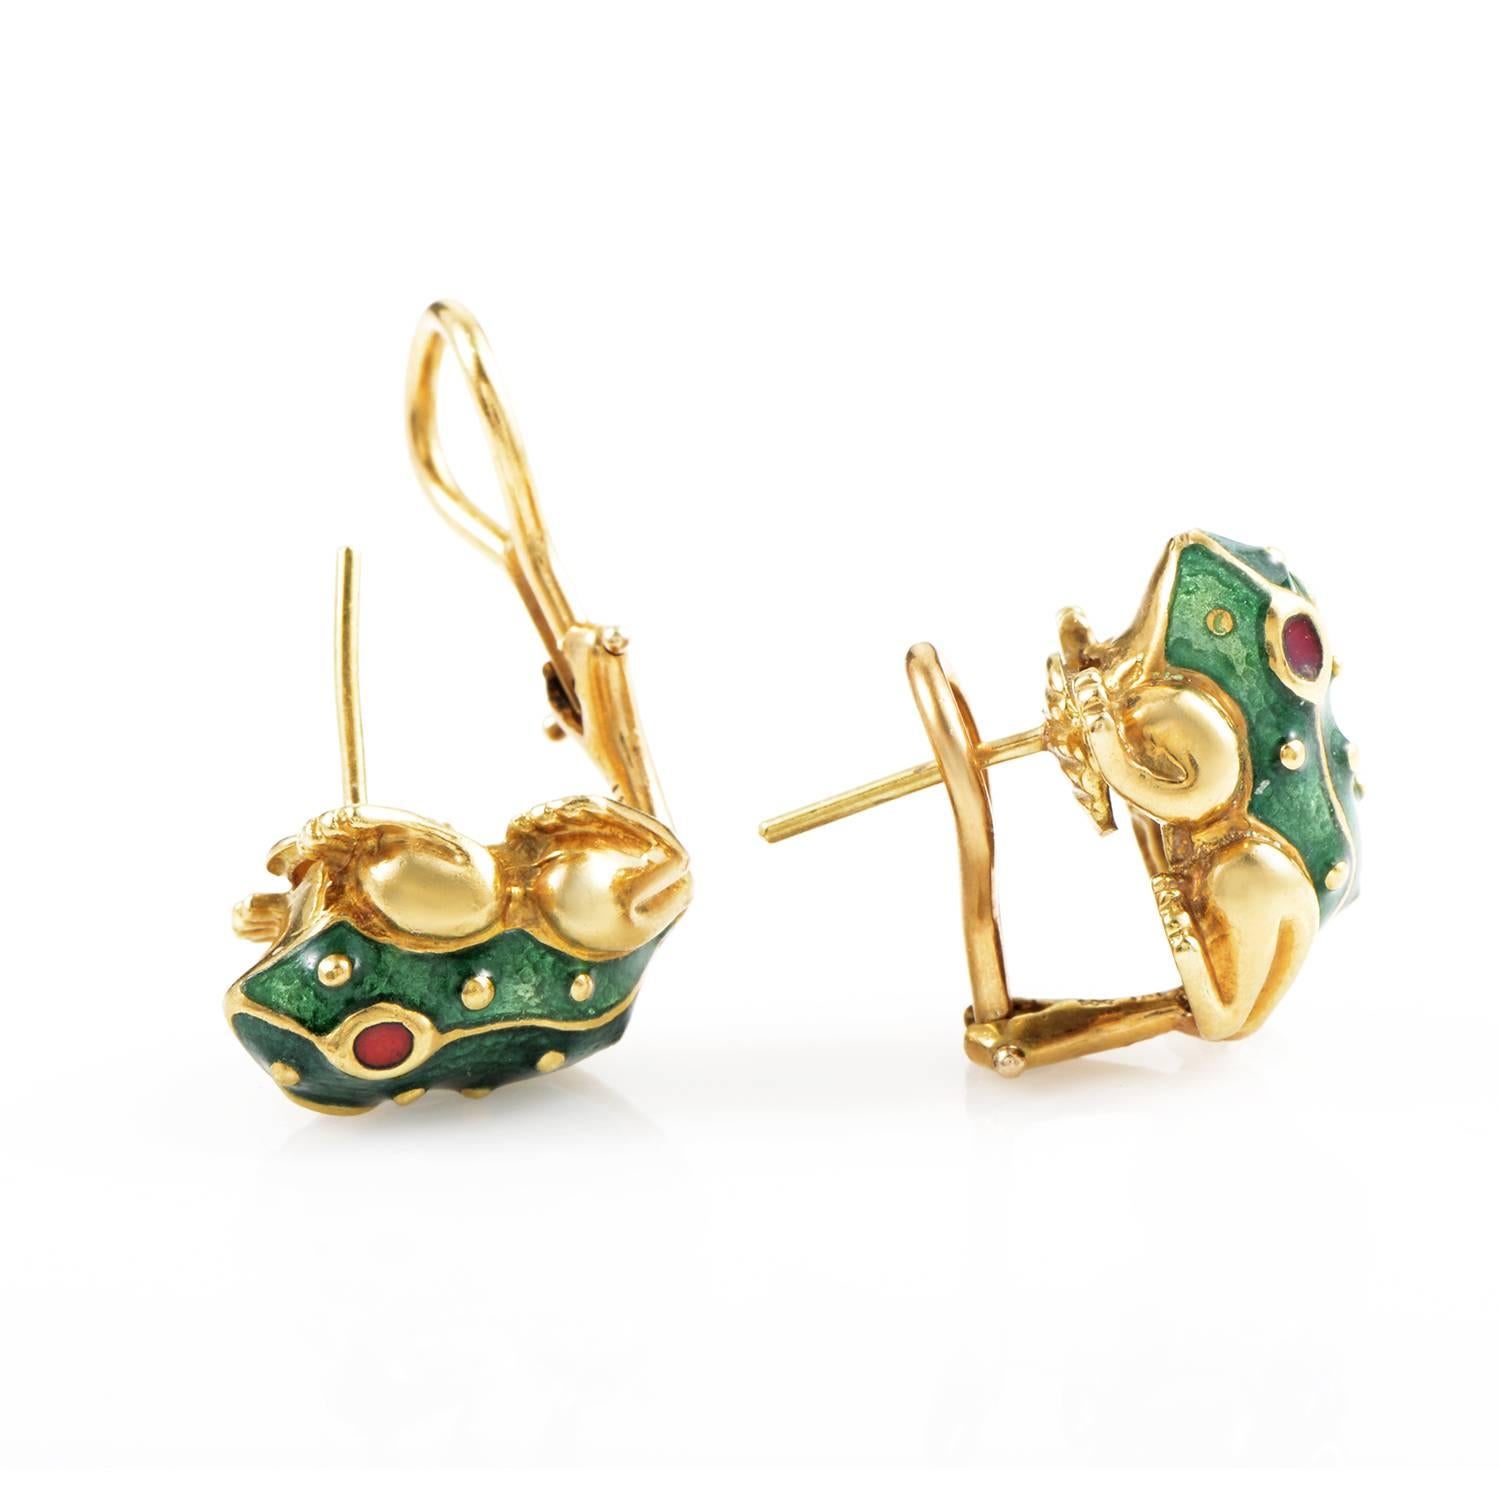 With gorgeous green enameled body and striking ruby eyes, the wonderful shapes of frogs come to life in these exceptional earrings from David Webb, while luxurious 18K yellow gold gives off a fabulous radiant allure.